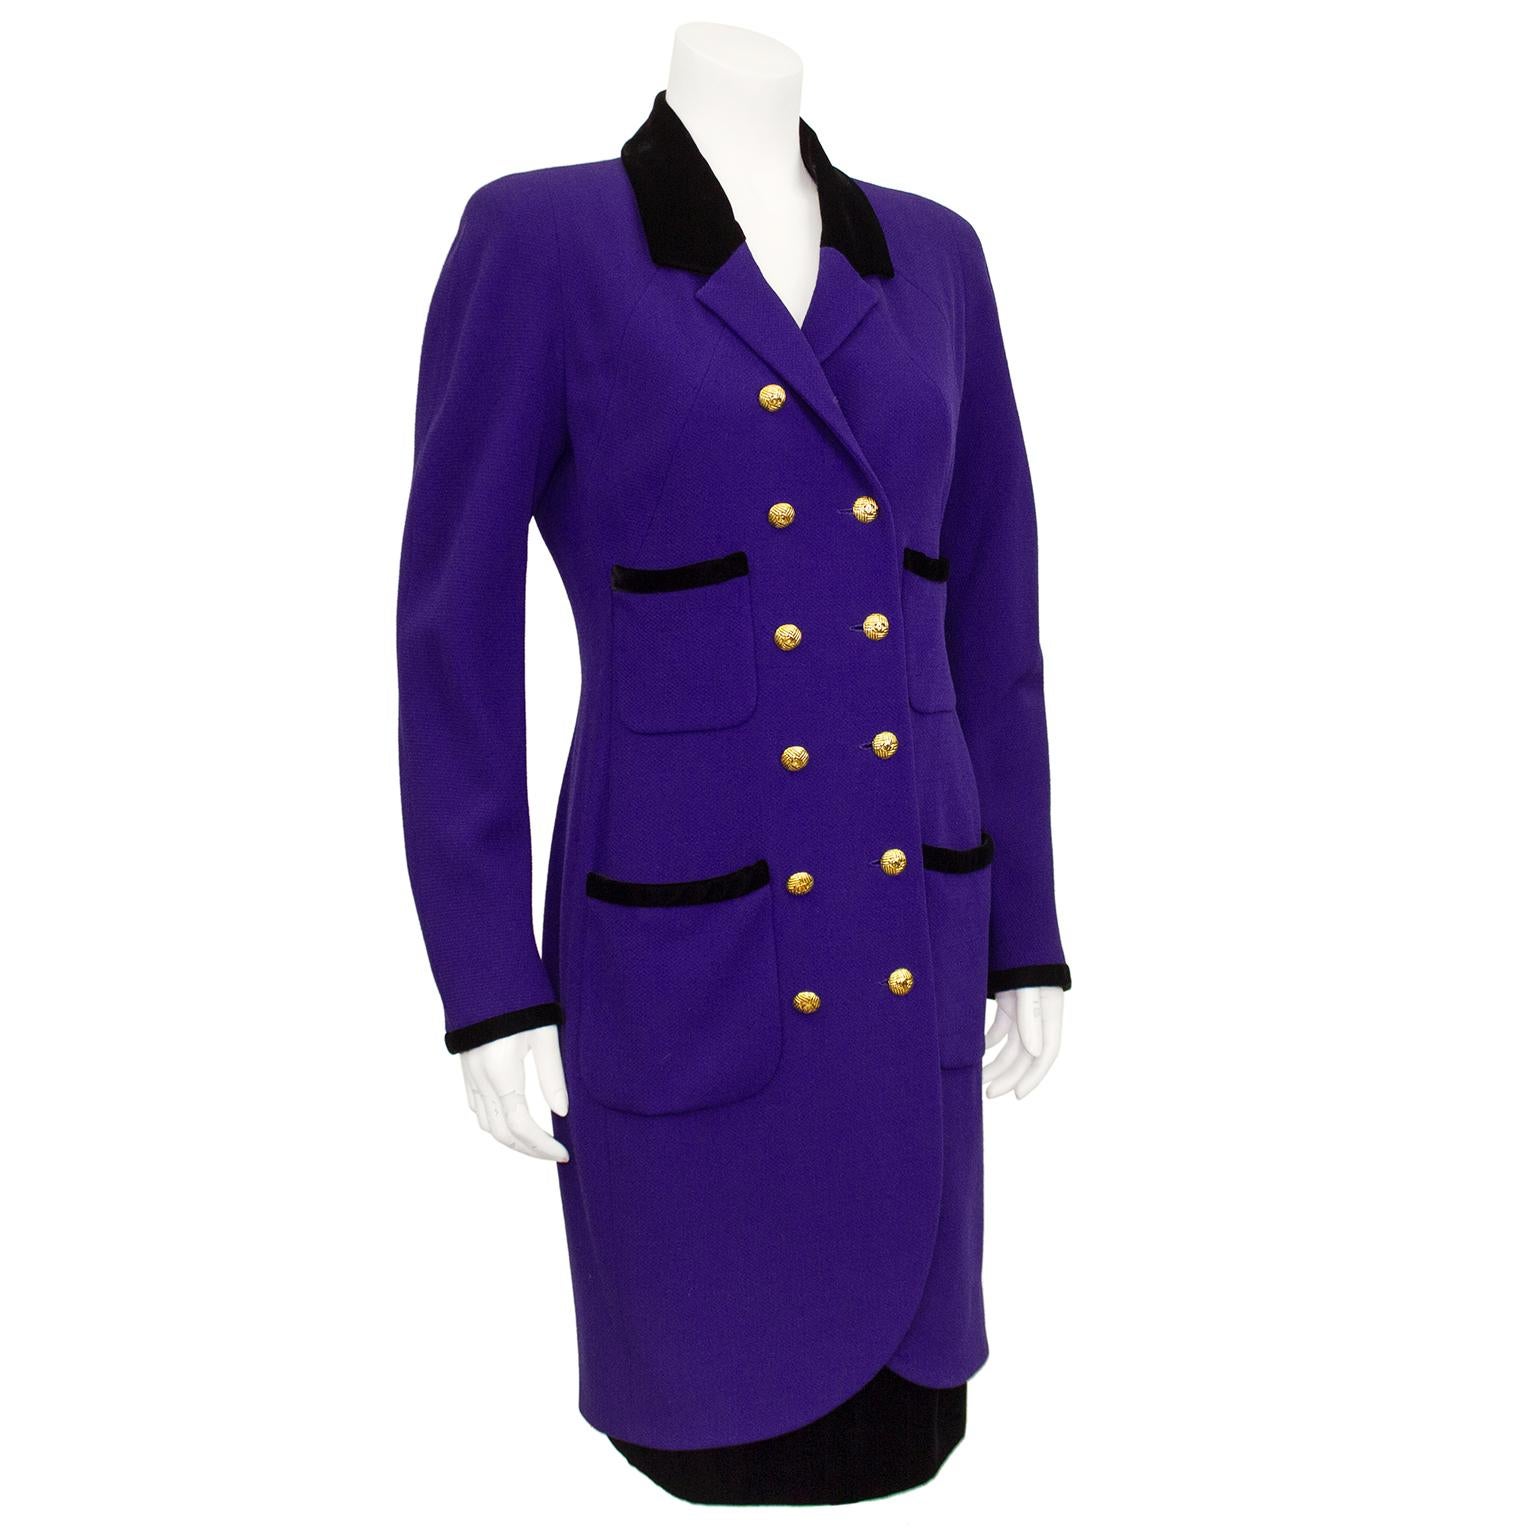 Chanel coat dress and skirt ensemble from the 1980s. The deep purple wool of the coat dress is contrasted by the jet black cut velvet collar and trim. Double breasted with gold tone metal Chanel logo buttons. Four patch pockets with velvet trim.